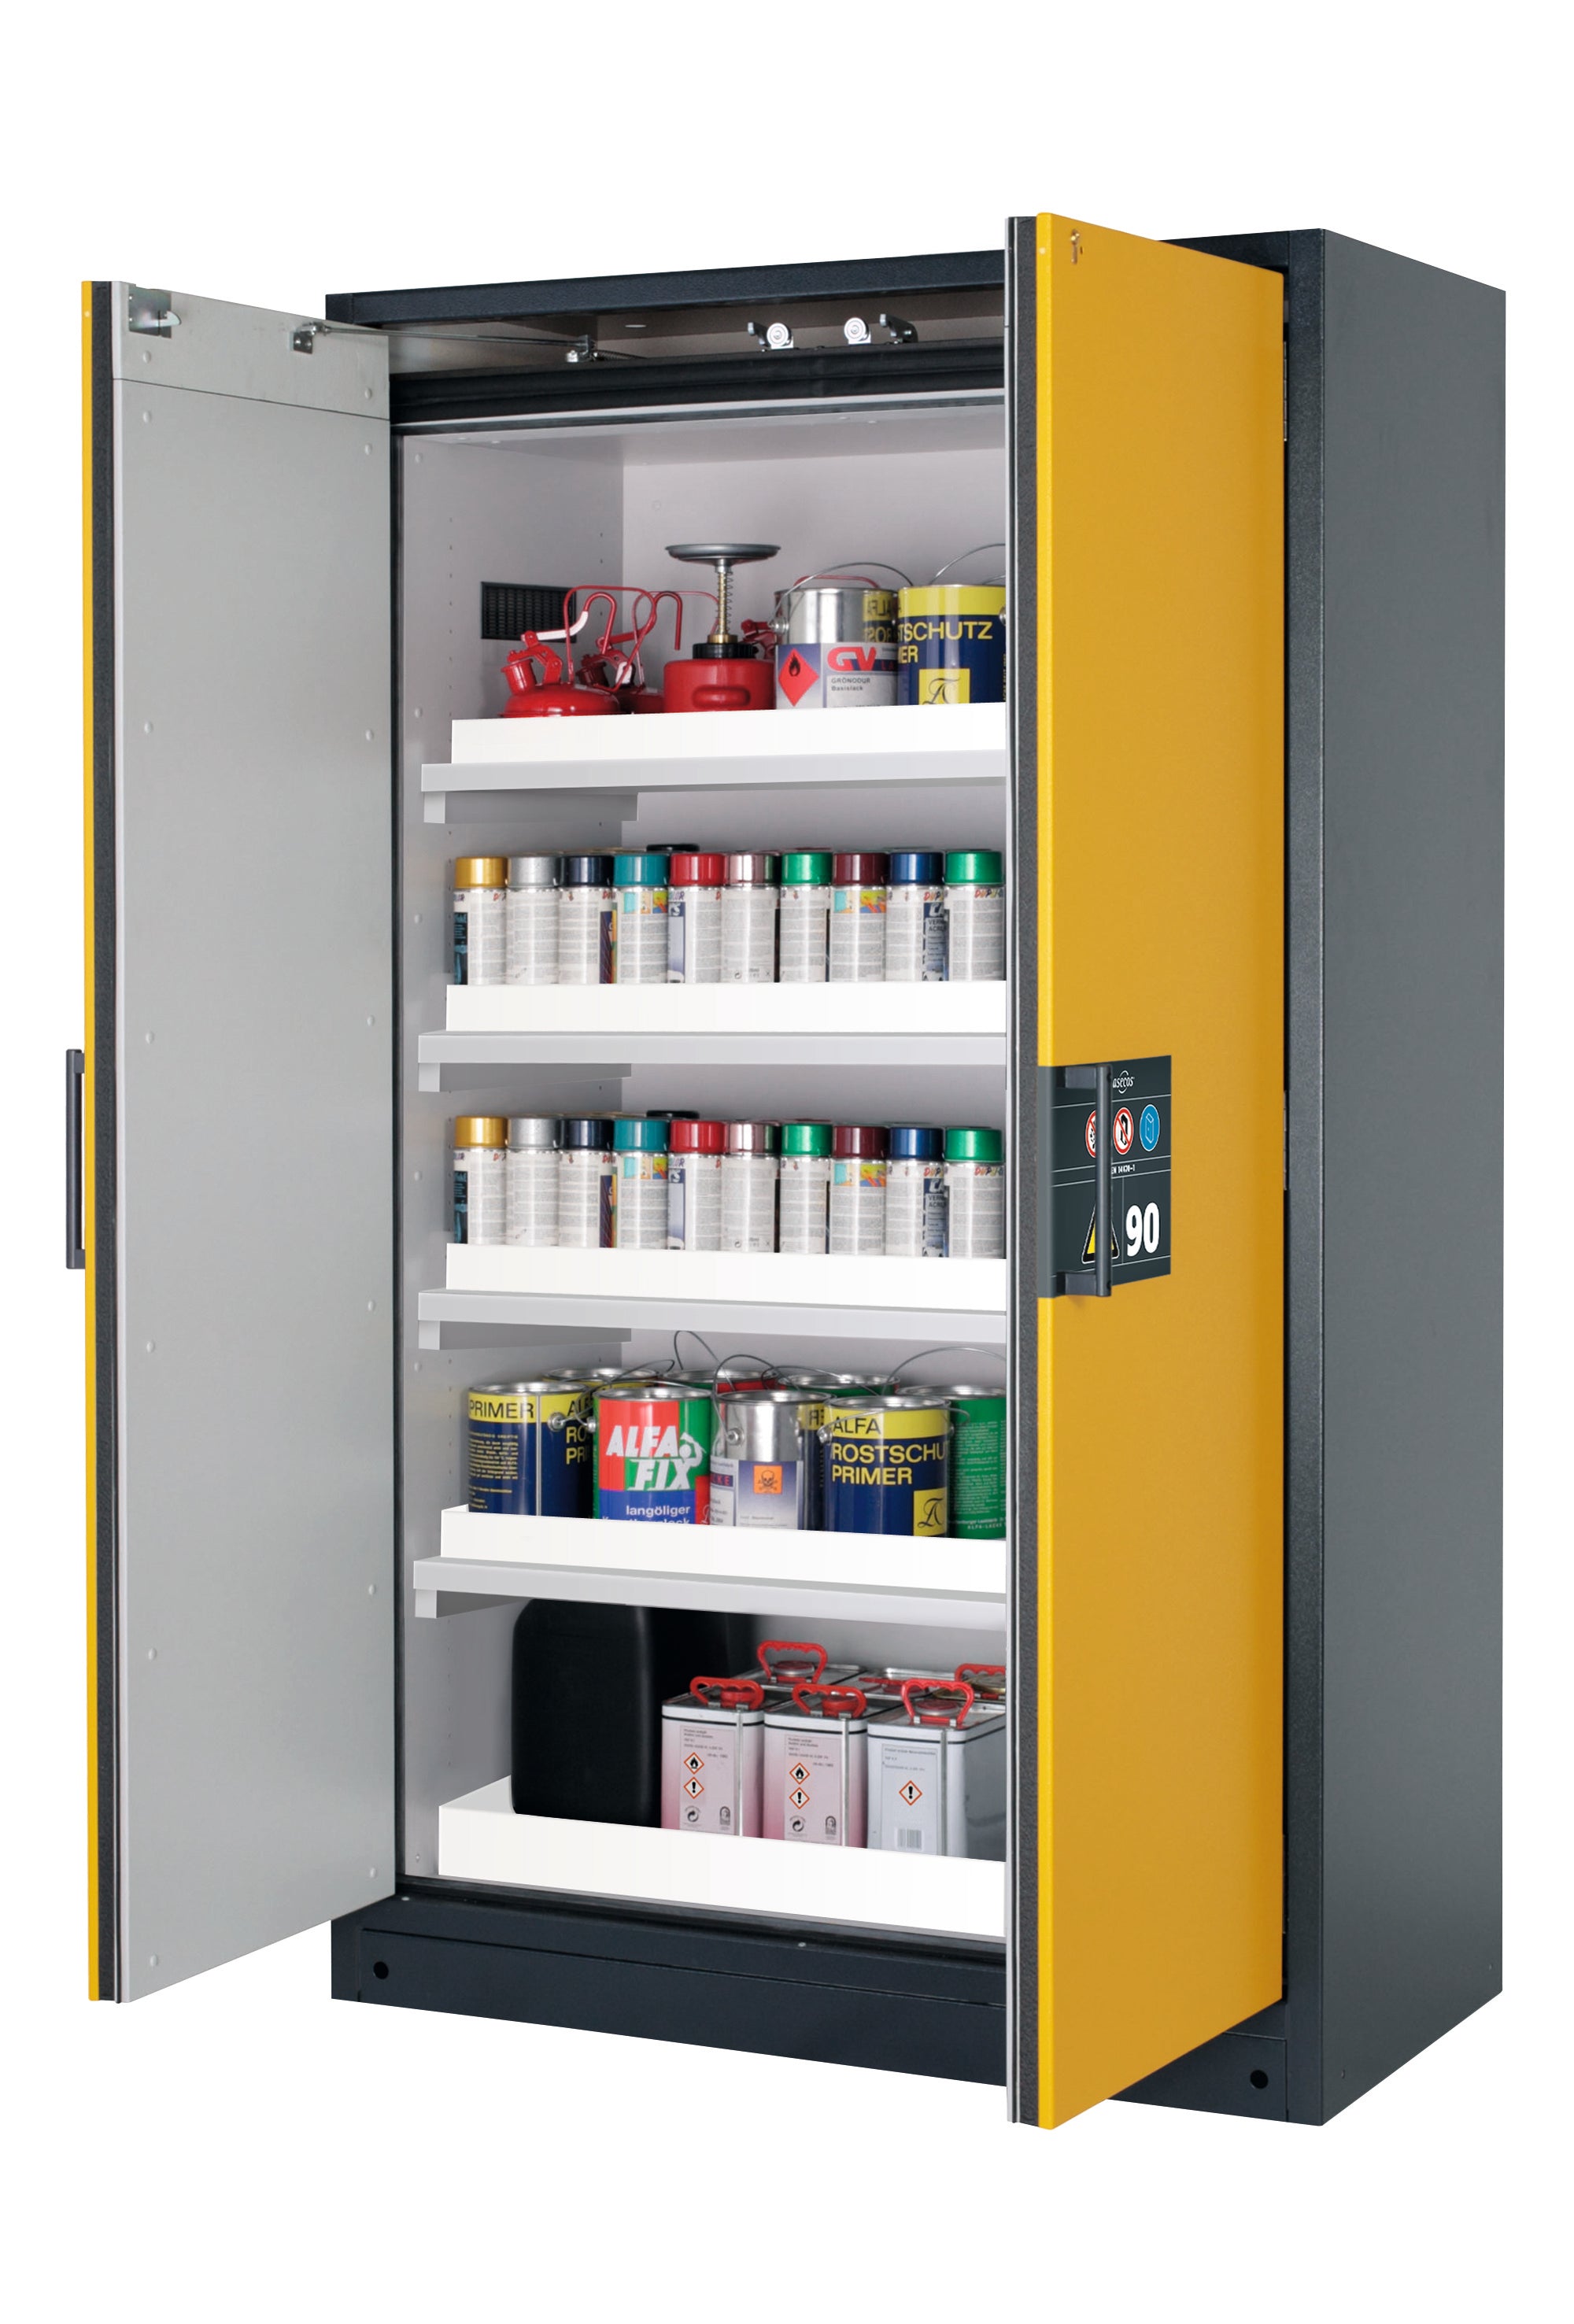 Type 90 safety storage cabinet Q-CLASSIC-90 model Q90.195.120 in warning yellow RAL 1004 with 4x tray shelf (standard) (polypropylene),